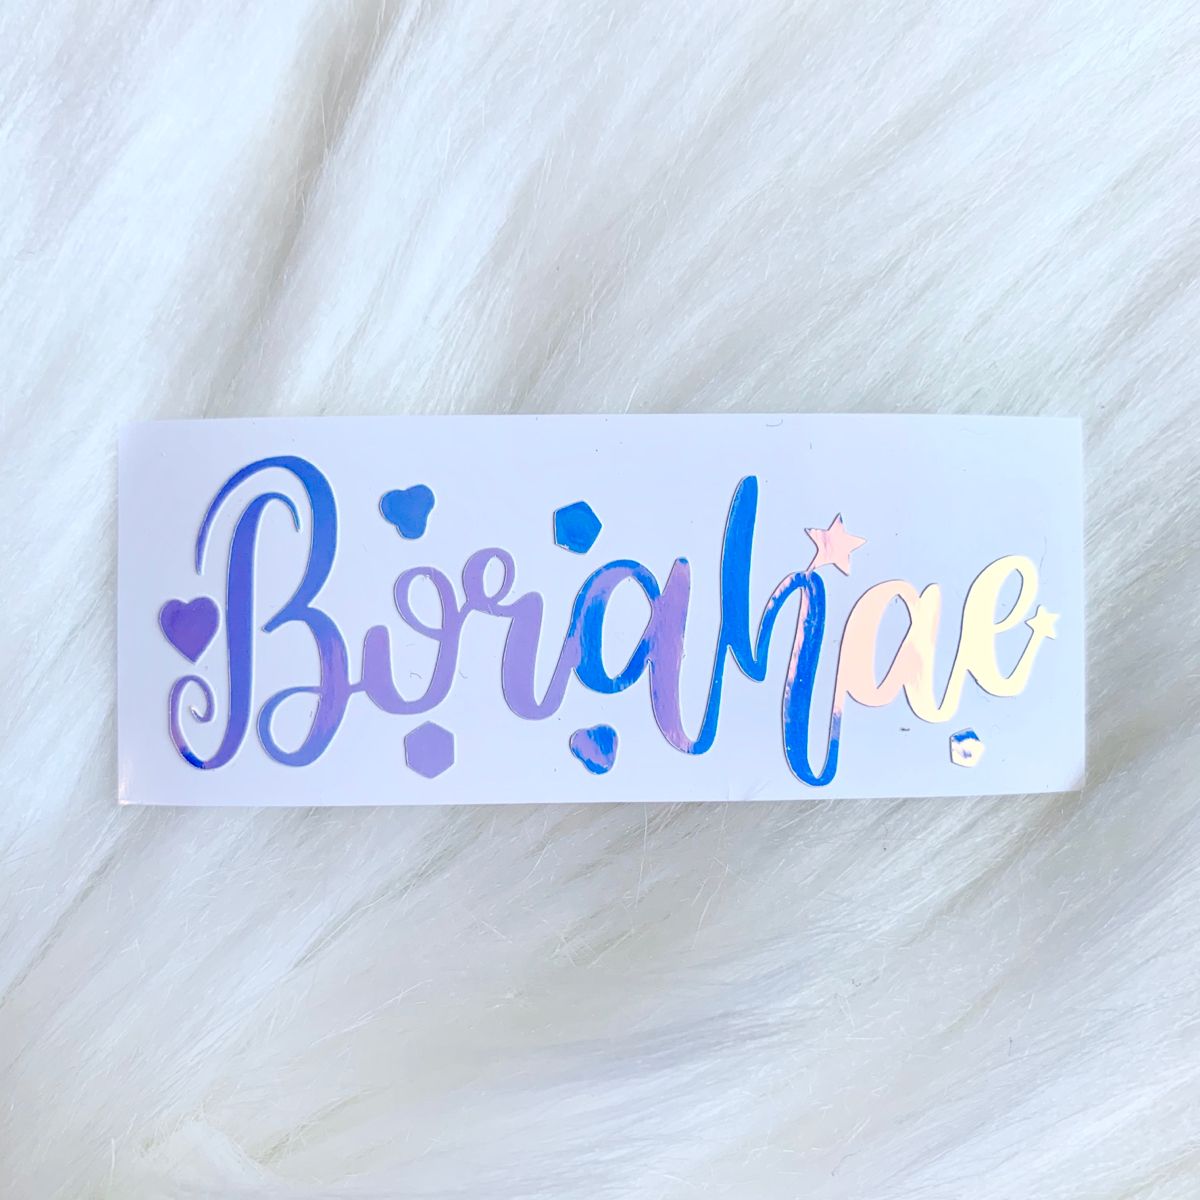 Borahae Vinyl Holographic Decal for ARMY BOMB Ver.3 Kpop. Etsy. Lettering, Bts drawings, Hand lettering